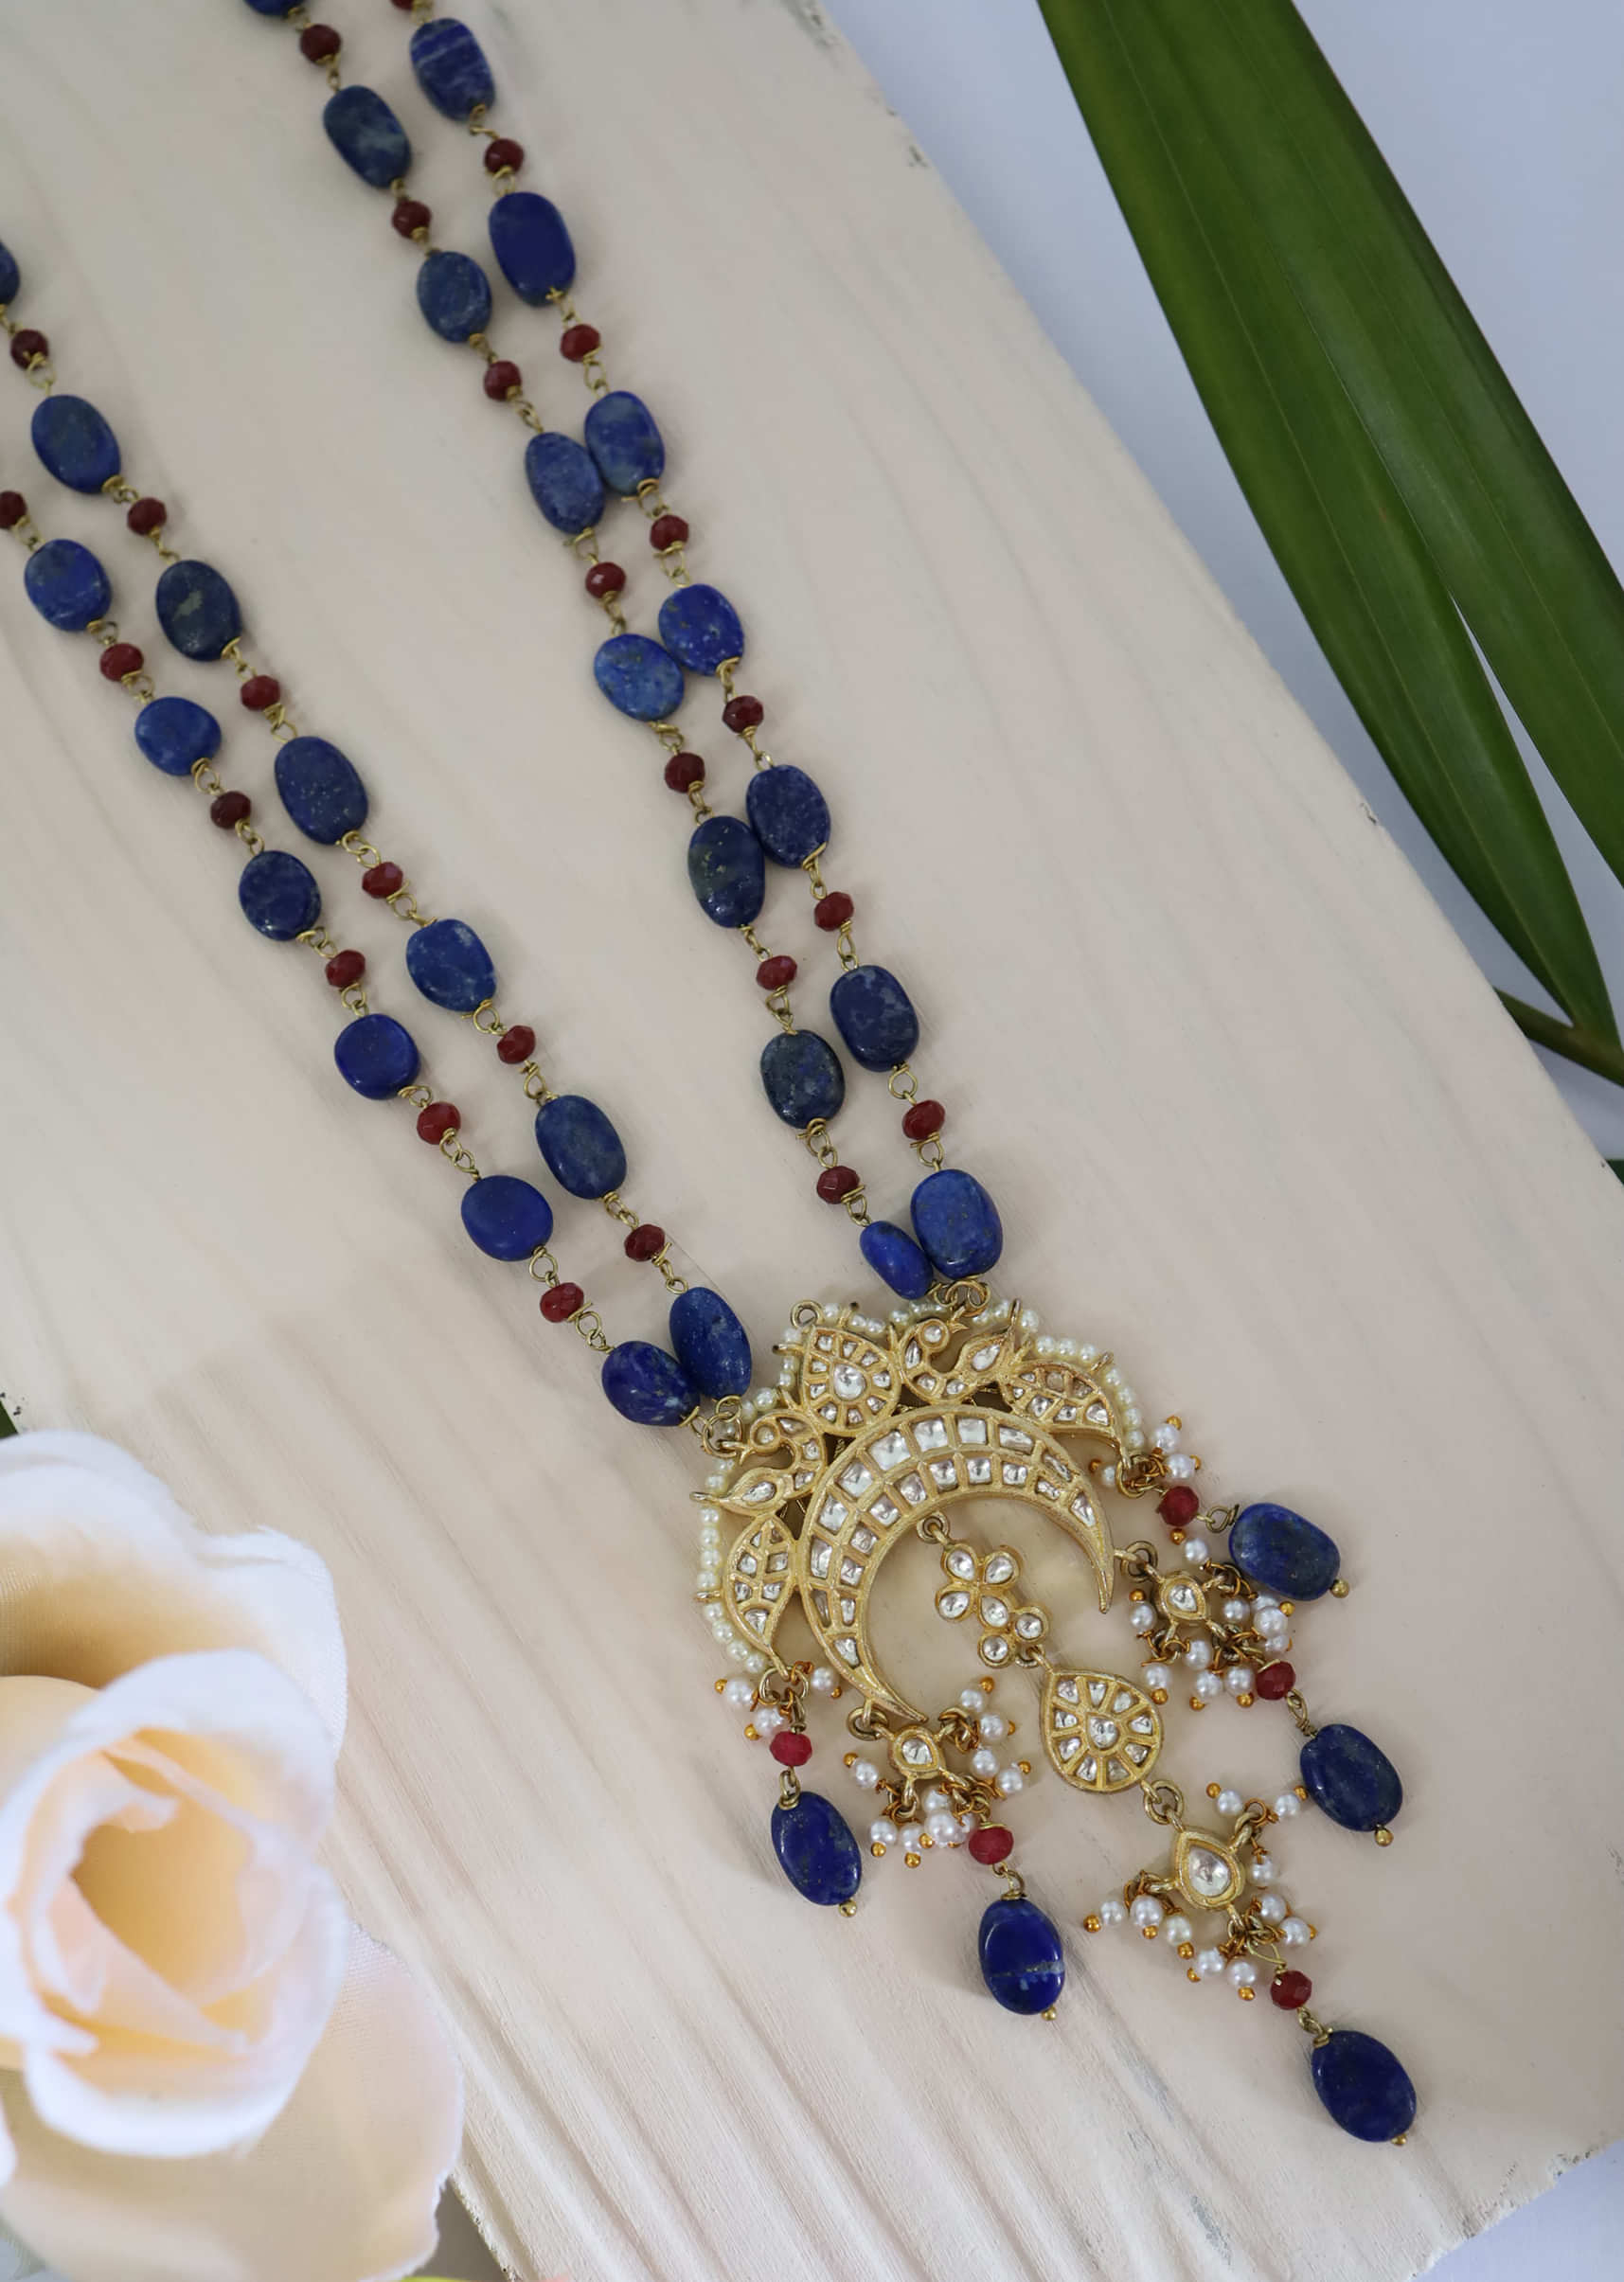 Blue Lapis Stone Necklace With Small Ruby Stones, Kundan Pendant And Pearls By Paisley Pop